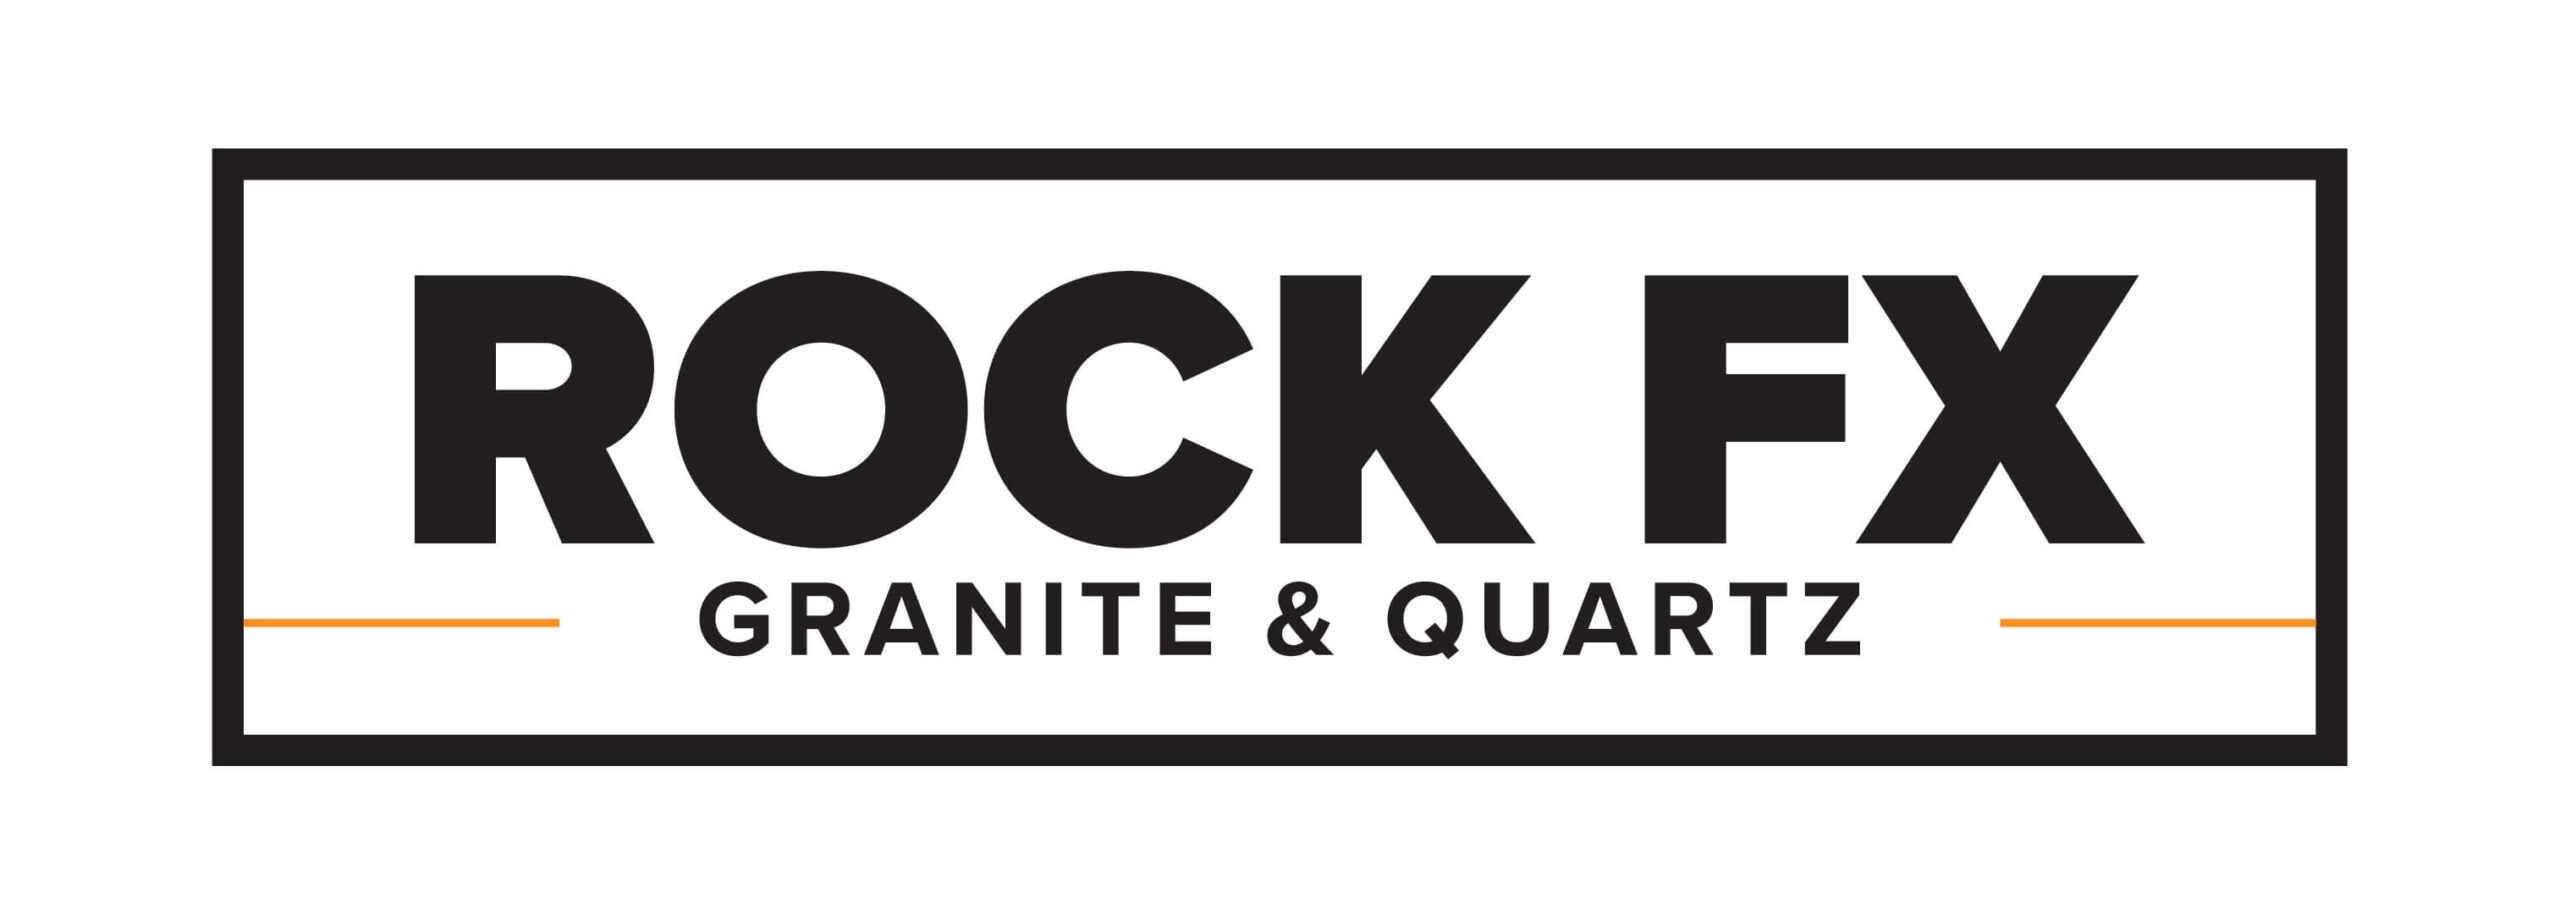 Alternate text-only version of the Rock FX logo